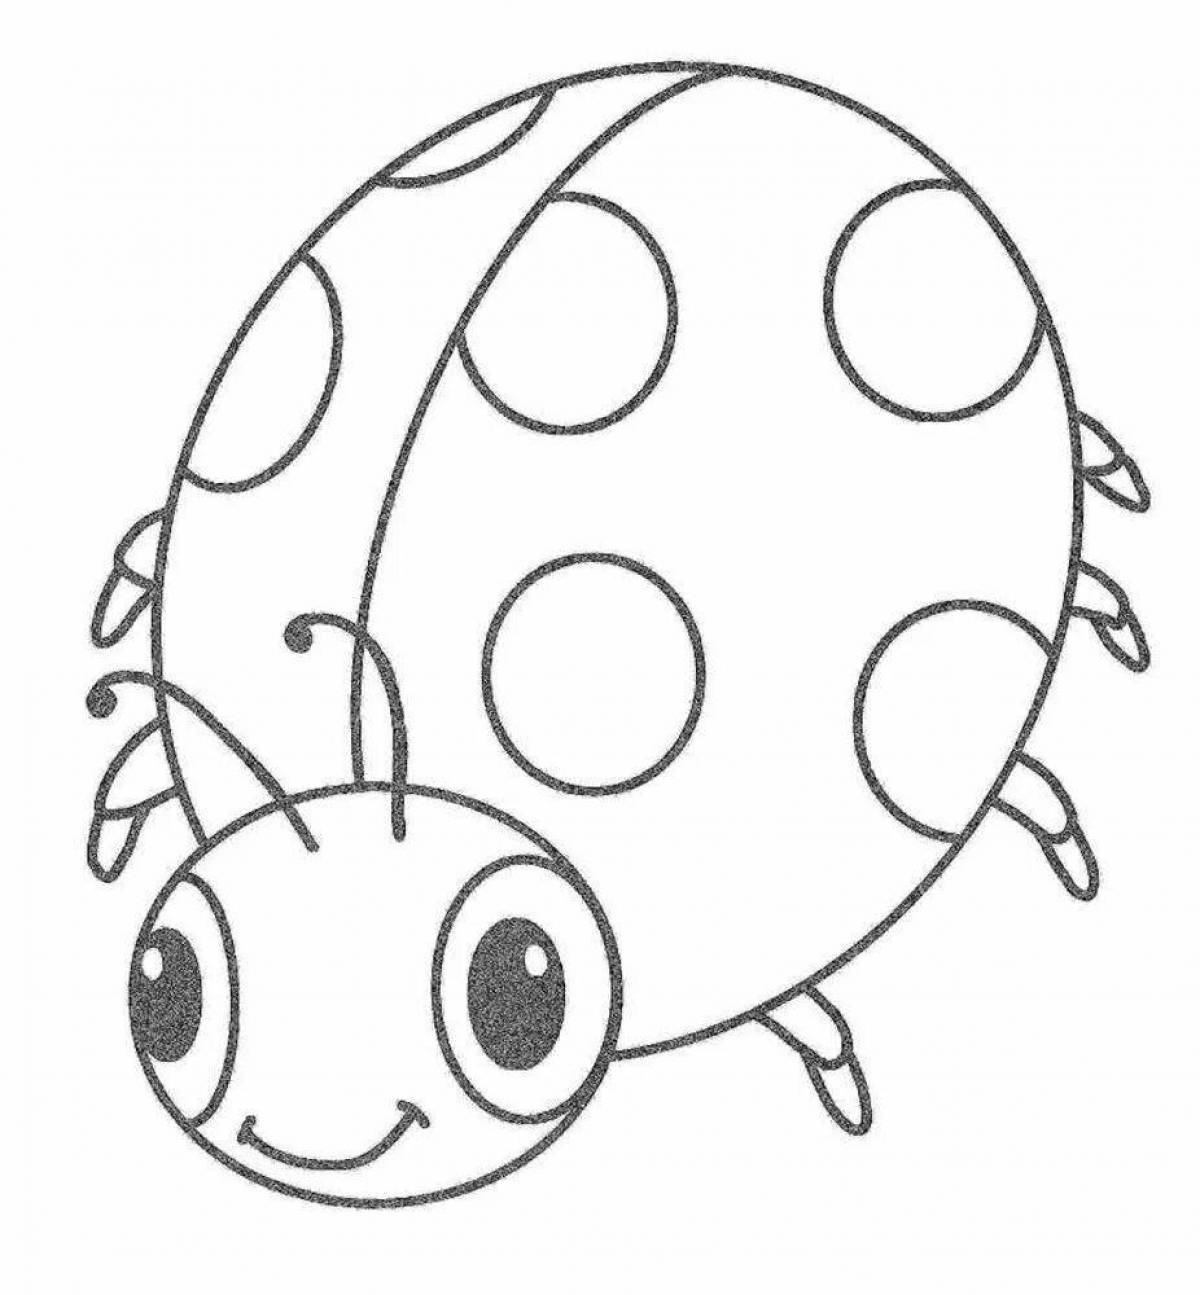 Adorable ladybug coloring book for kids 6-7 years old